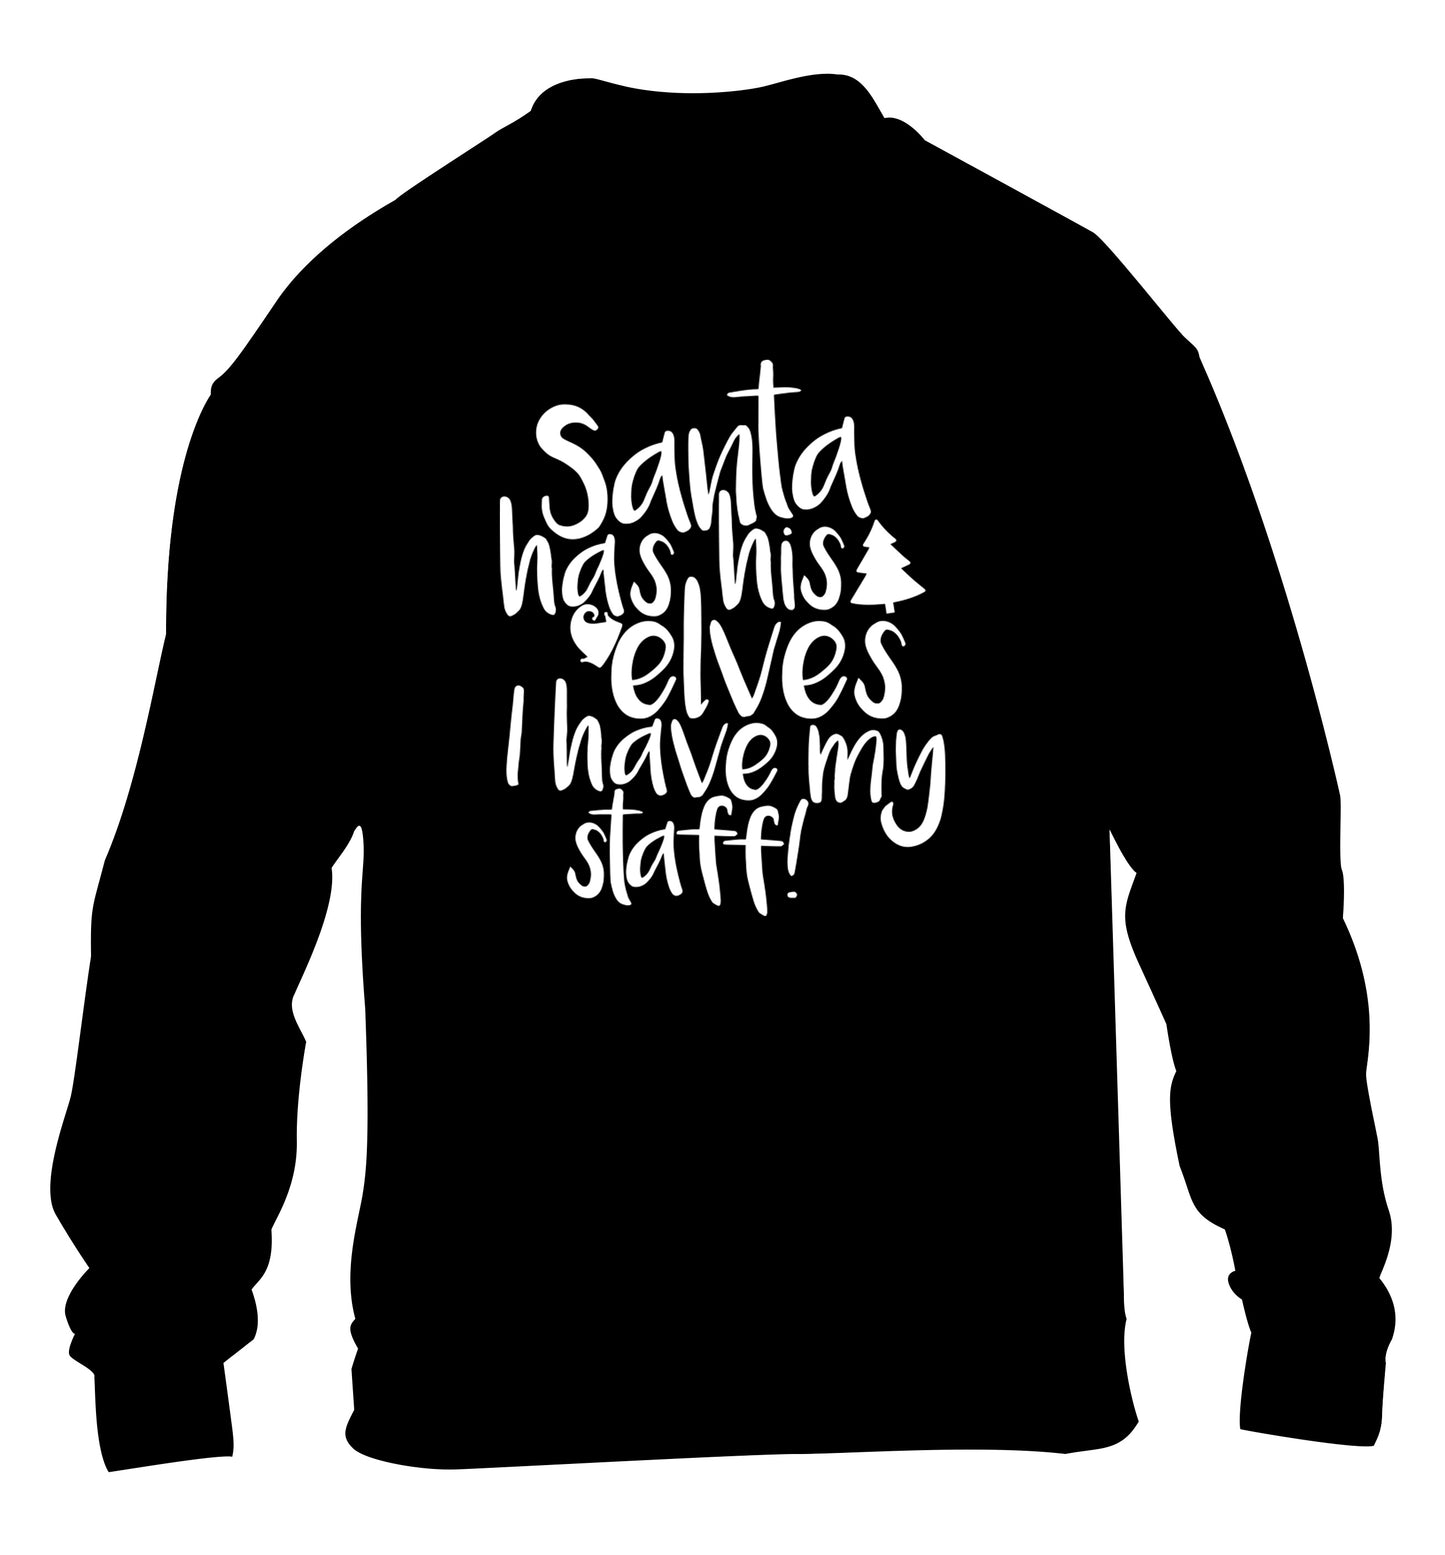 Santa has his elves I have my staff children's black sweater 12-14 Years